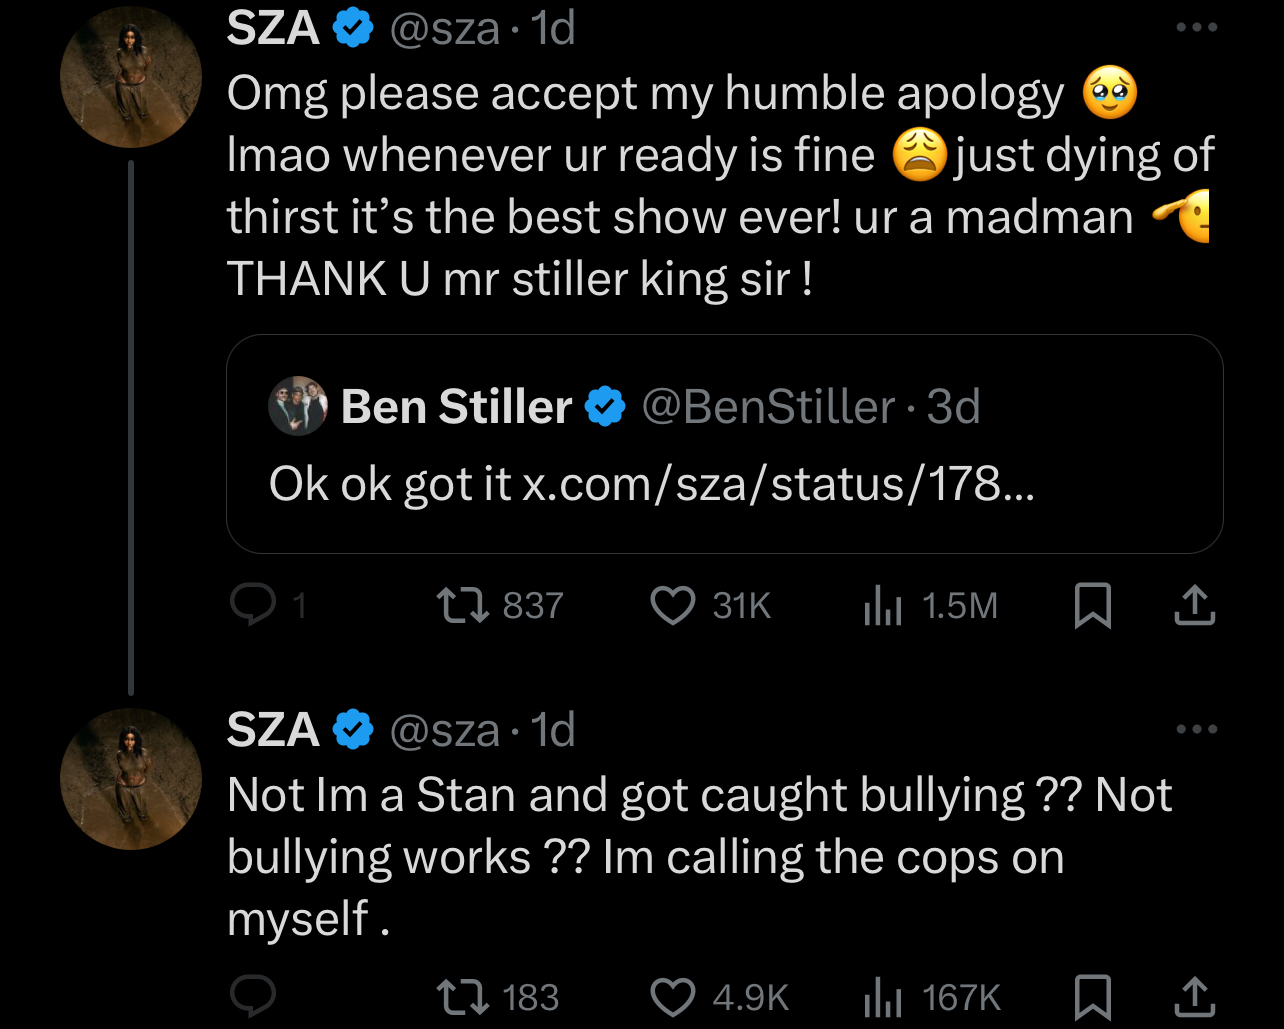 Two Twitter posts with SZA reacting to Ben Stiller and admitting to jokingly bullying, followed by Stiller&#x27;s playful acknowledgment